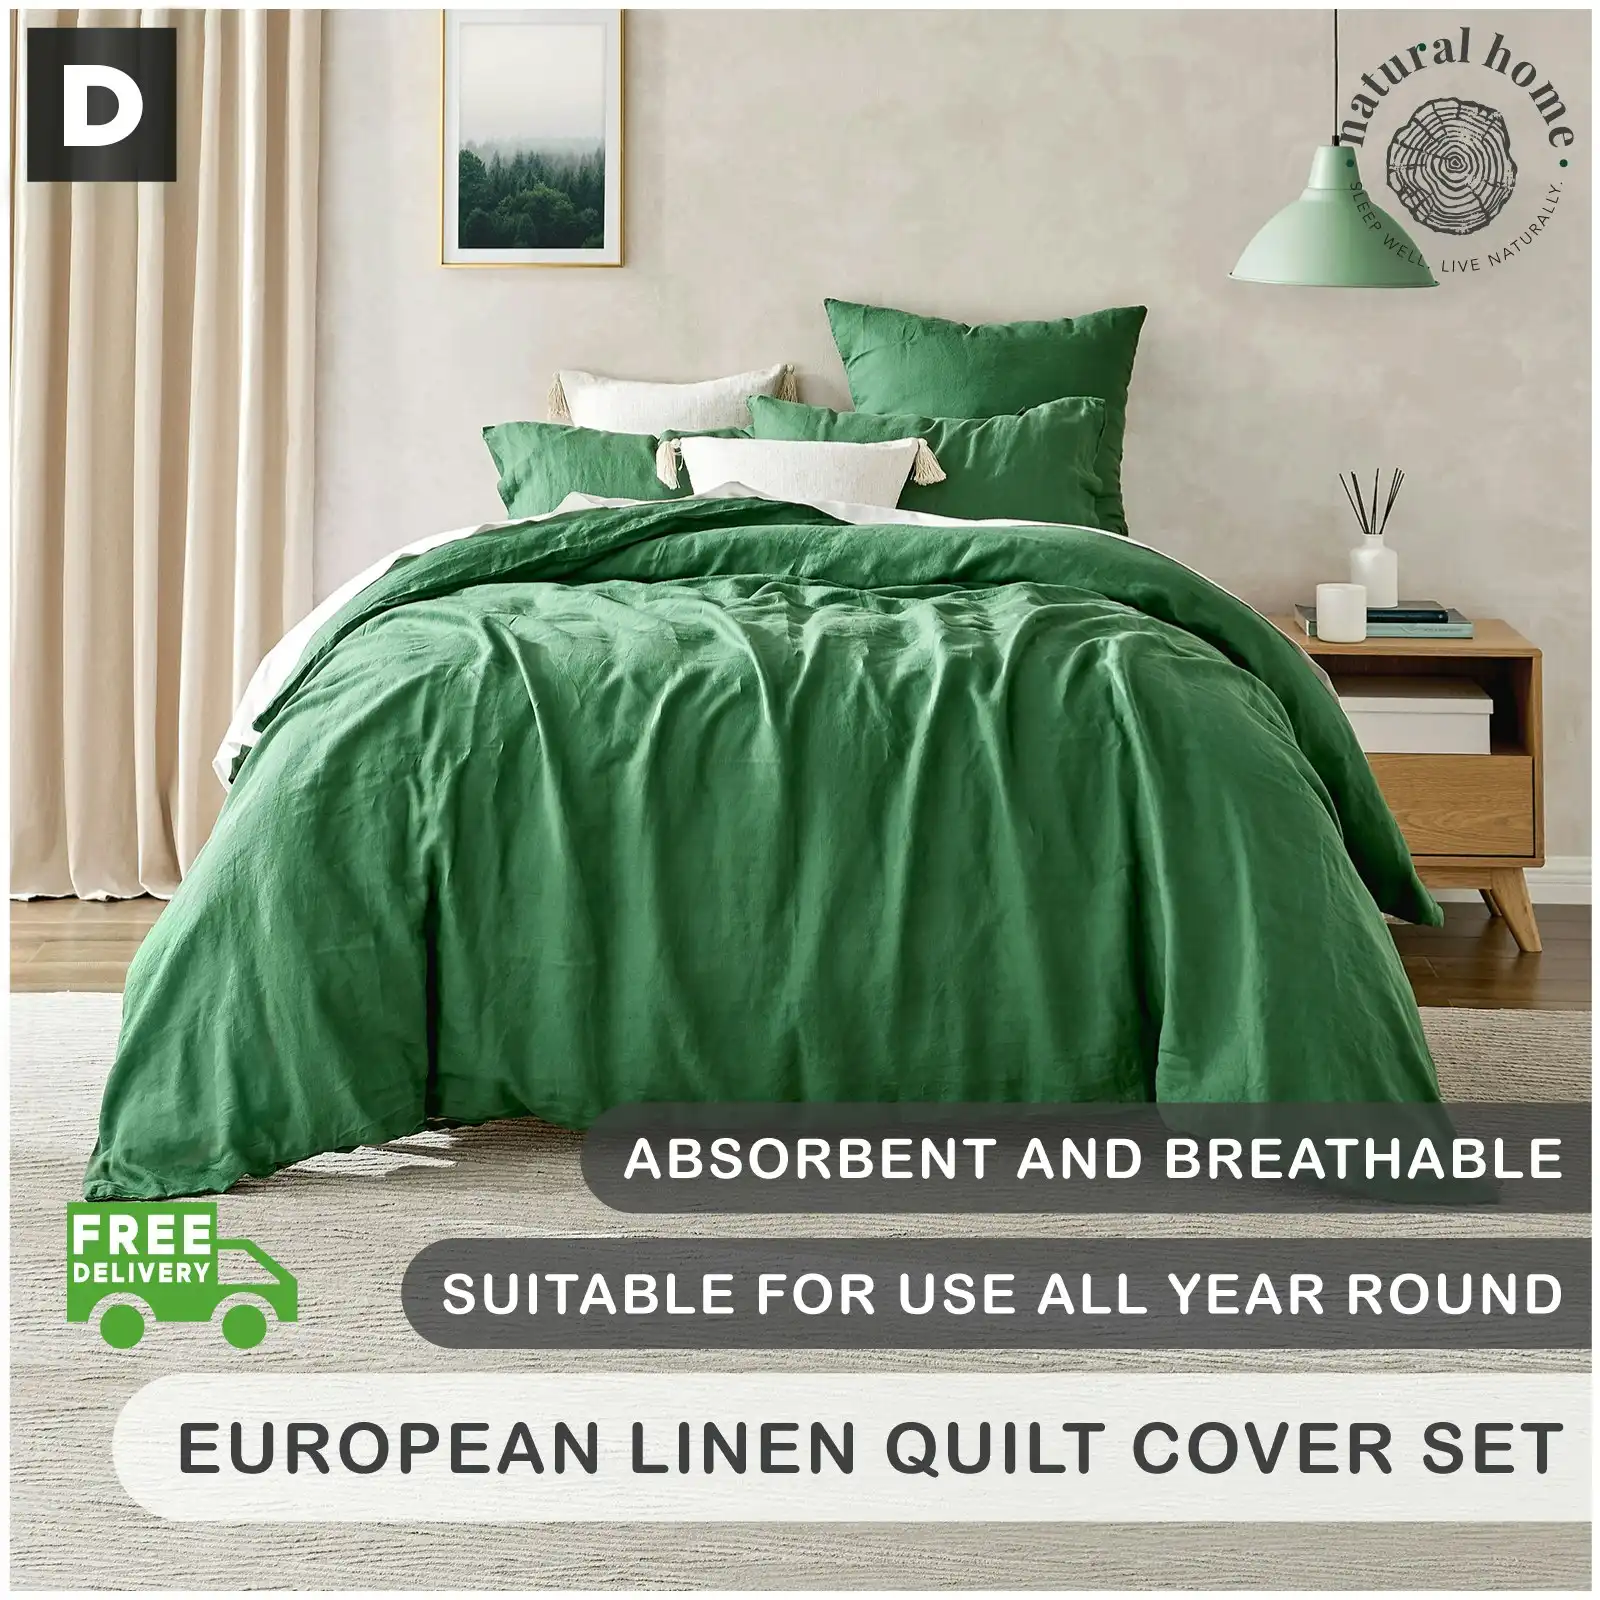 Natural Home Linen 100% European Flax Linen Quilt Cover Set Olive Double Bed